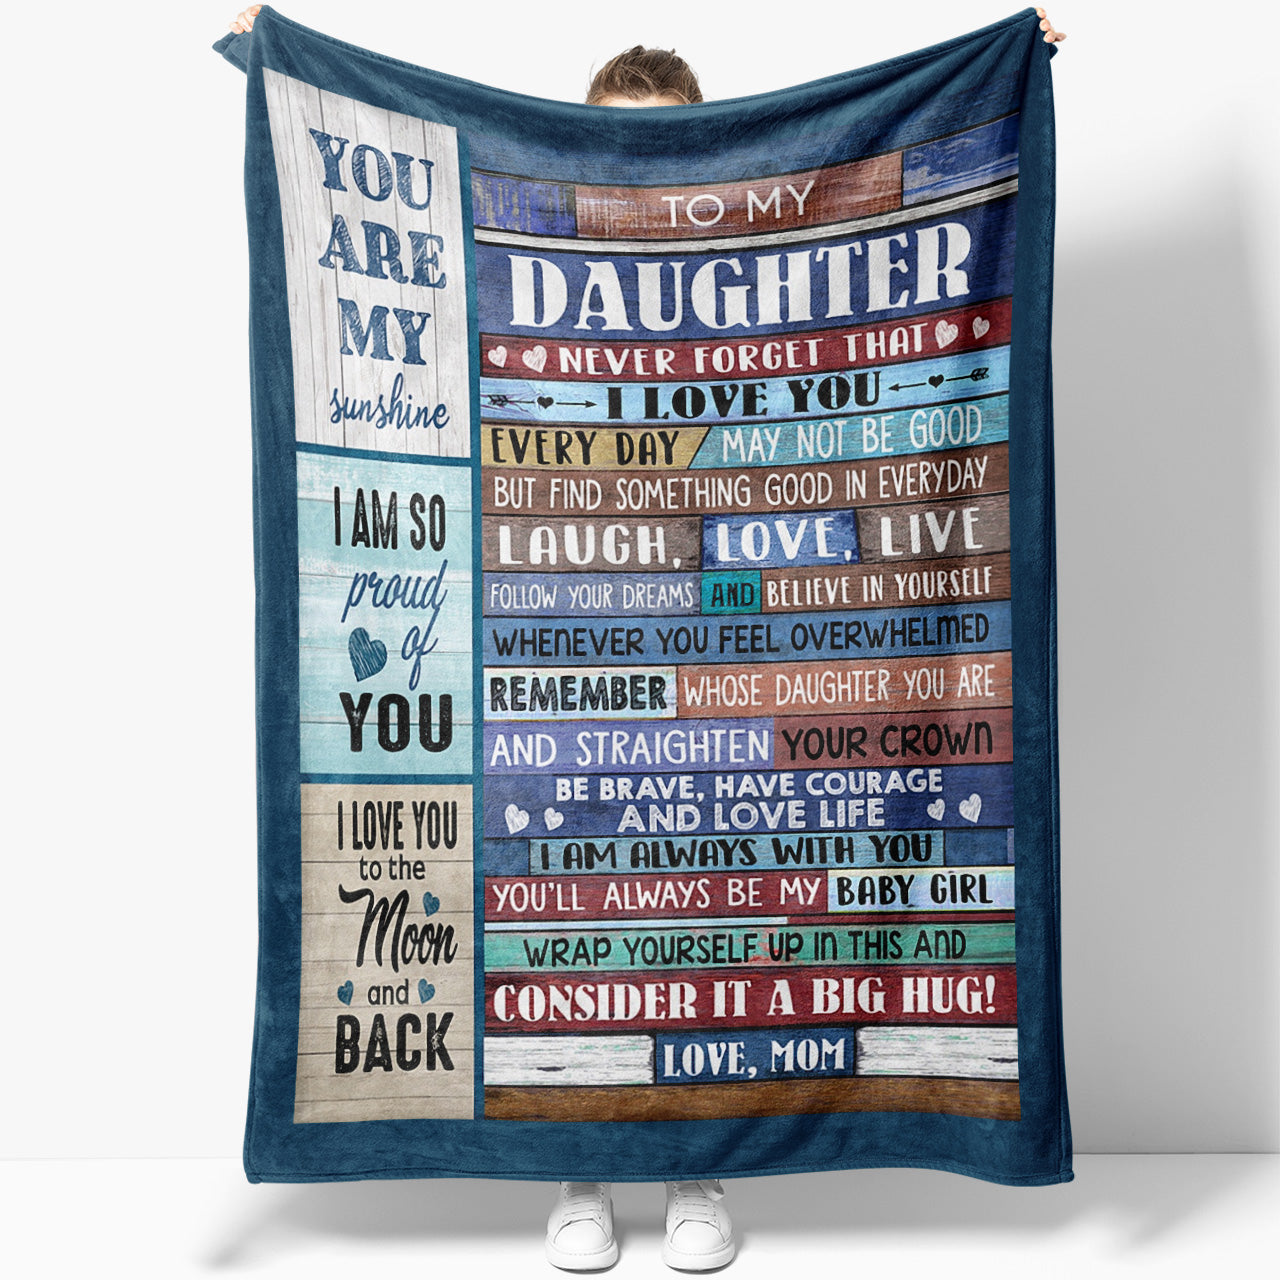 Blanket Gifts For Adult Daughter, Sentimental Gifts For Daughter From Mom,  I Love You Christmas Gifts For Daughter, Unique Mother Daughter Gifts -  Sweet Family Gift